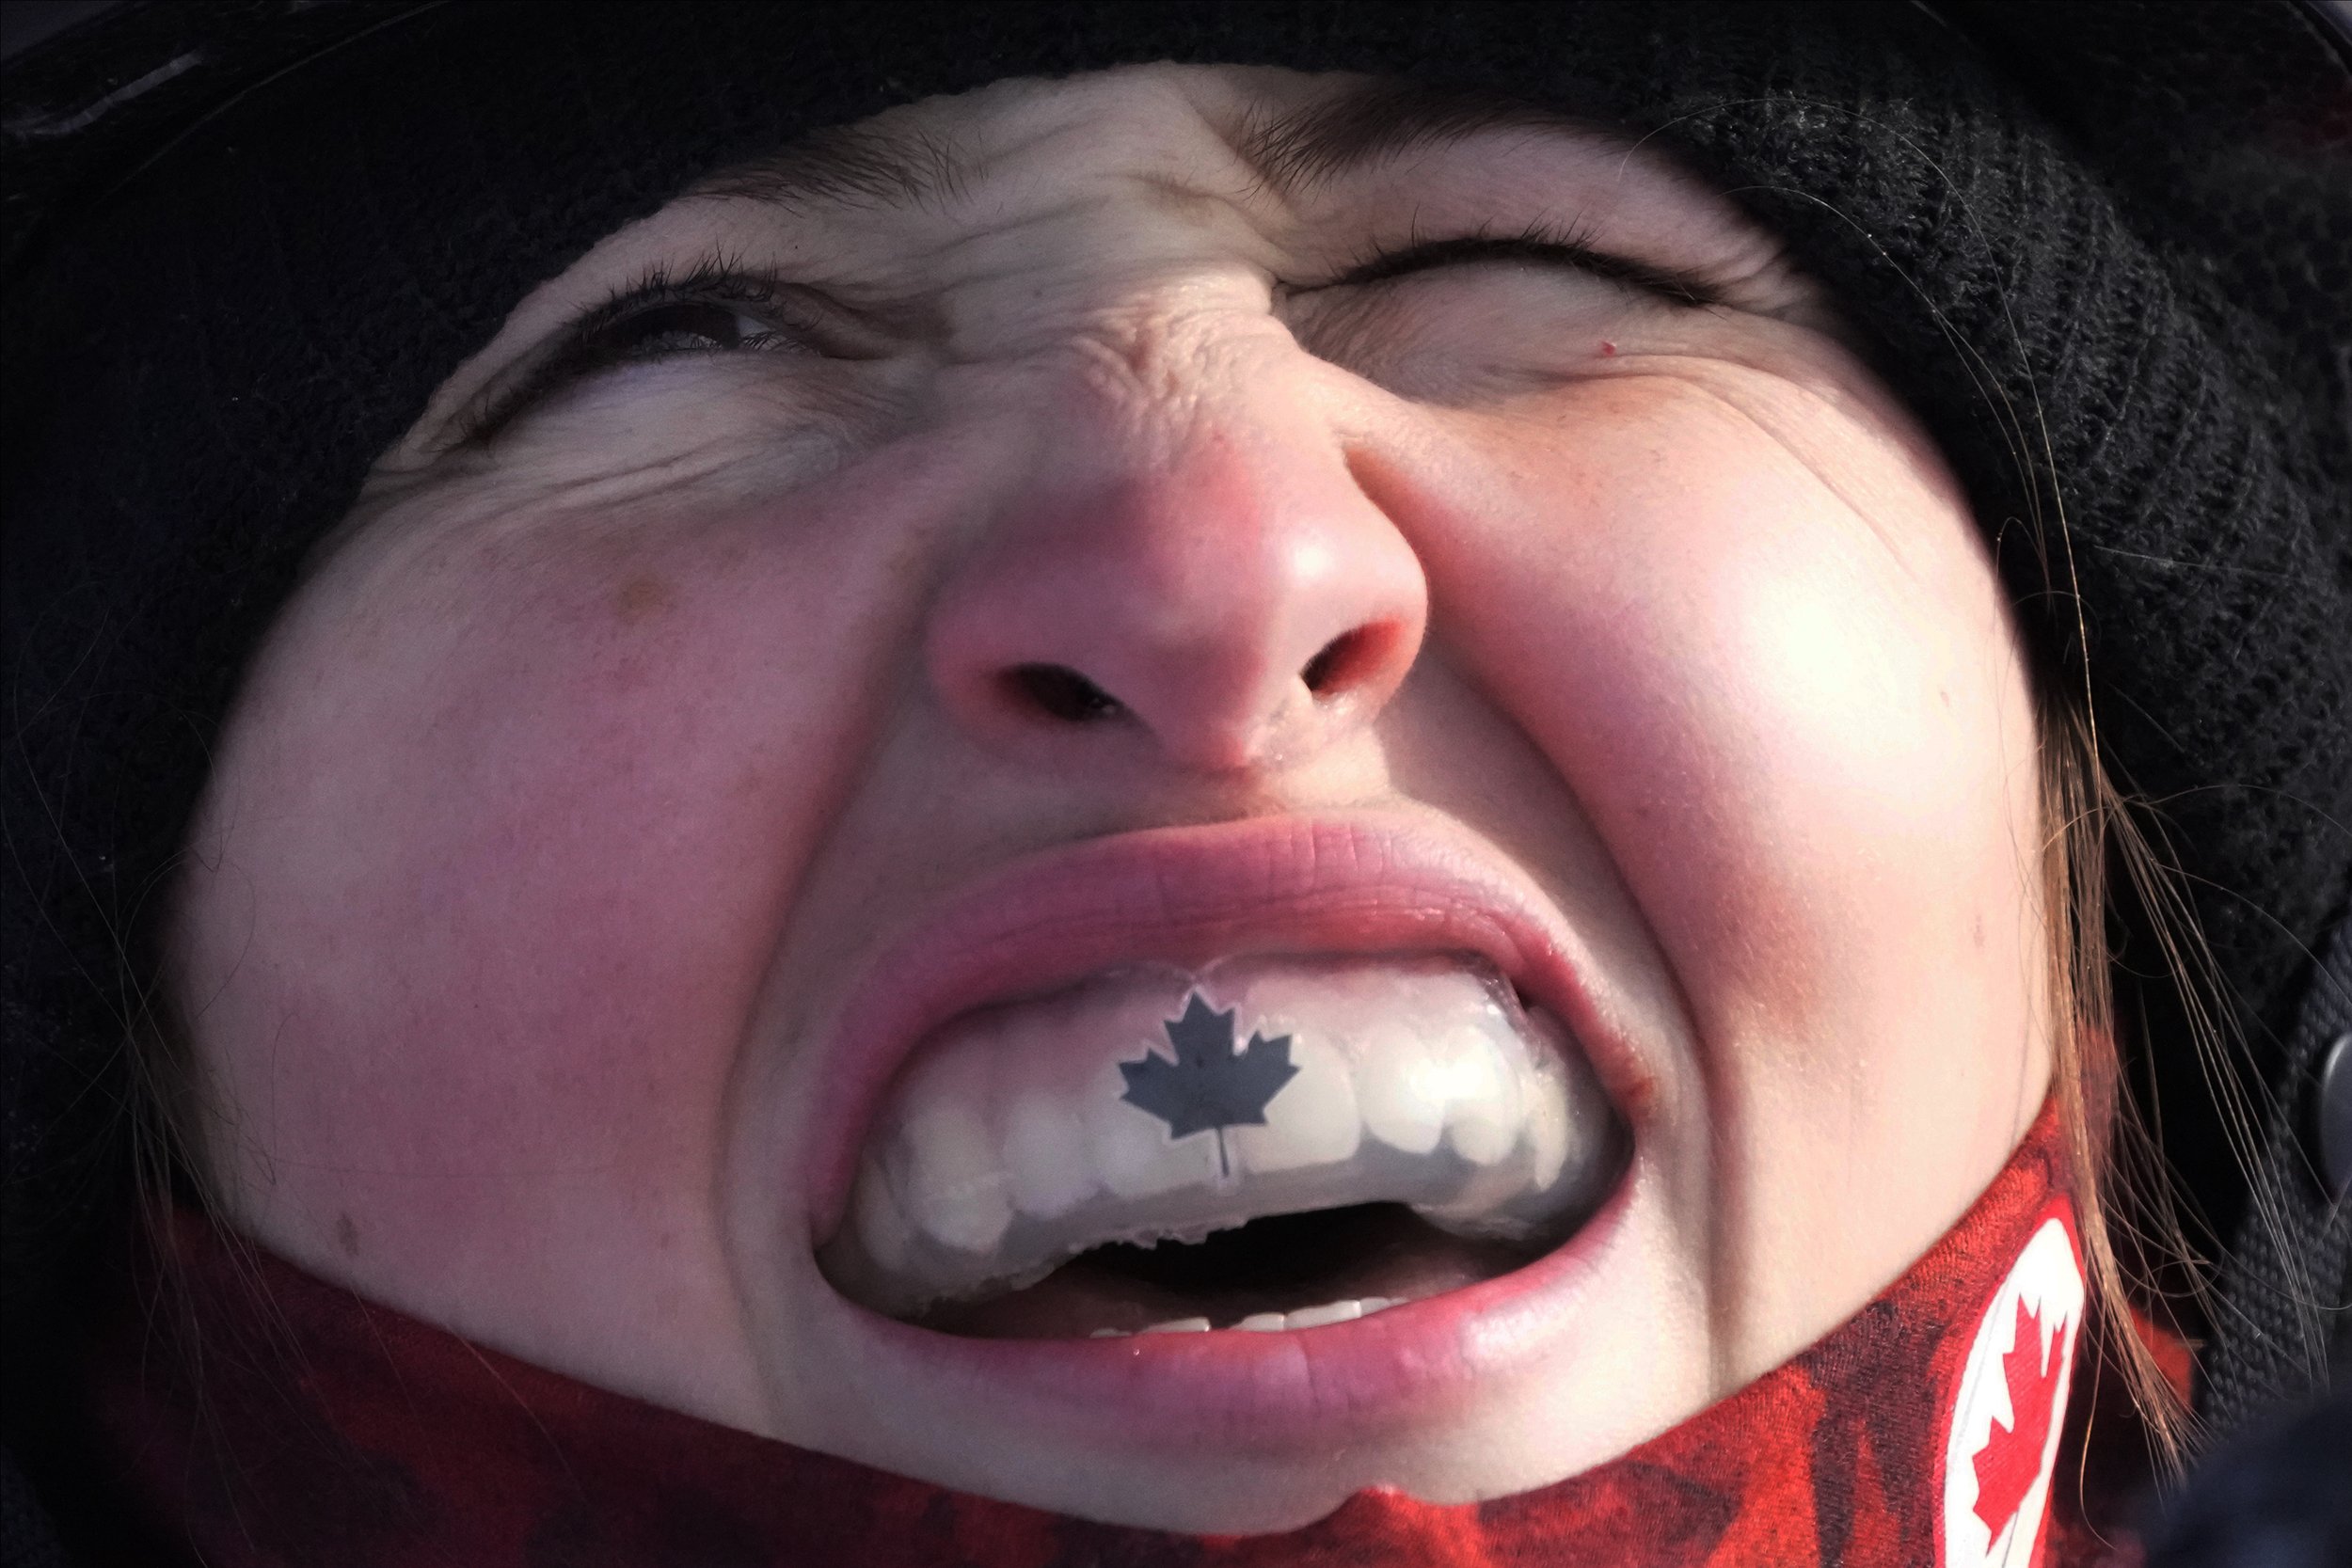  Canada's Elizabeth Hosking reacts during the women's halfpipe finals at the 2022 Winter Olympics, Thursday, Feb. 10, 2022, in Zhangjiakou, China. (AP Photo/Lee Jin-man) 